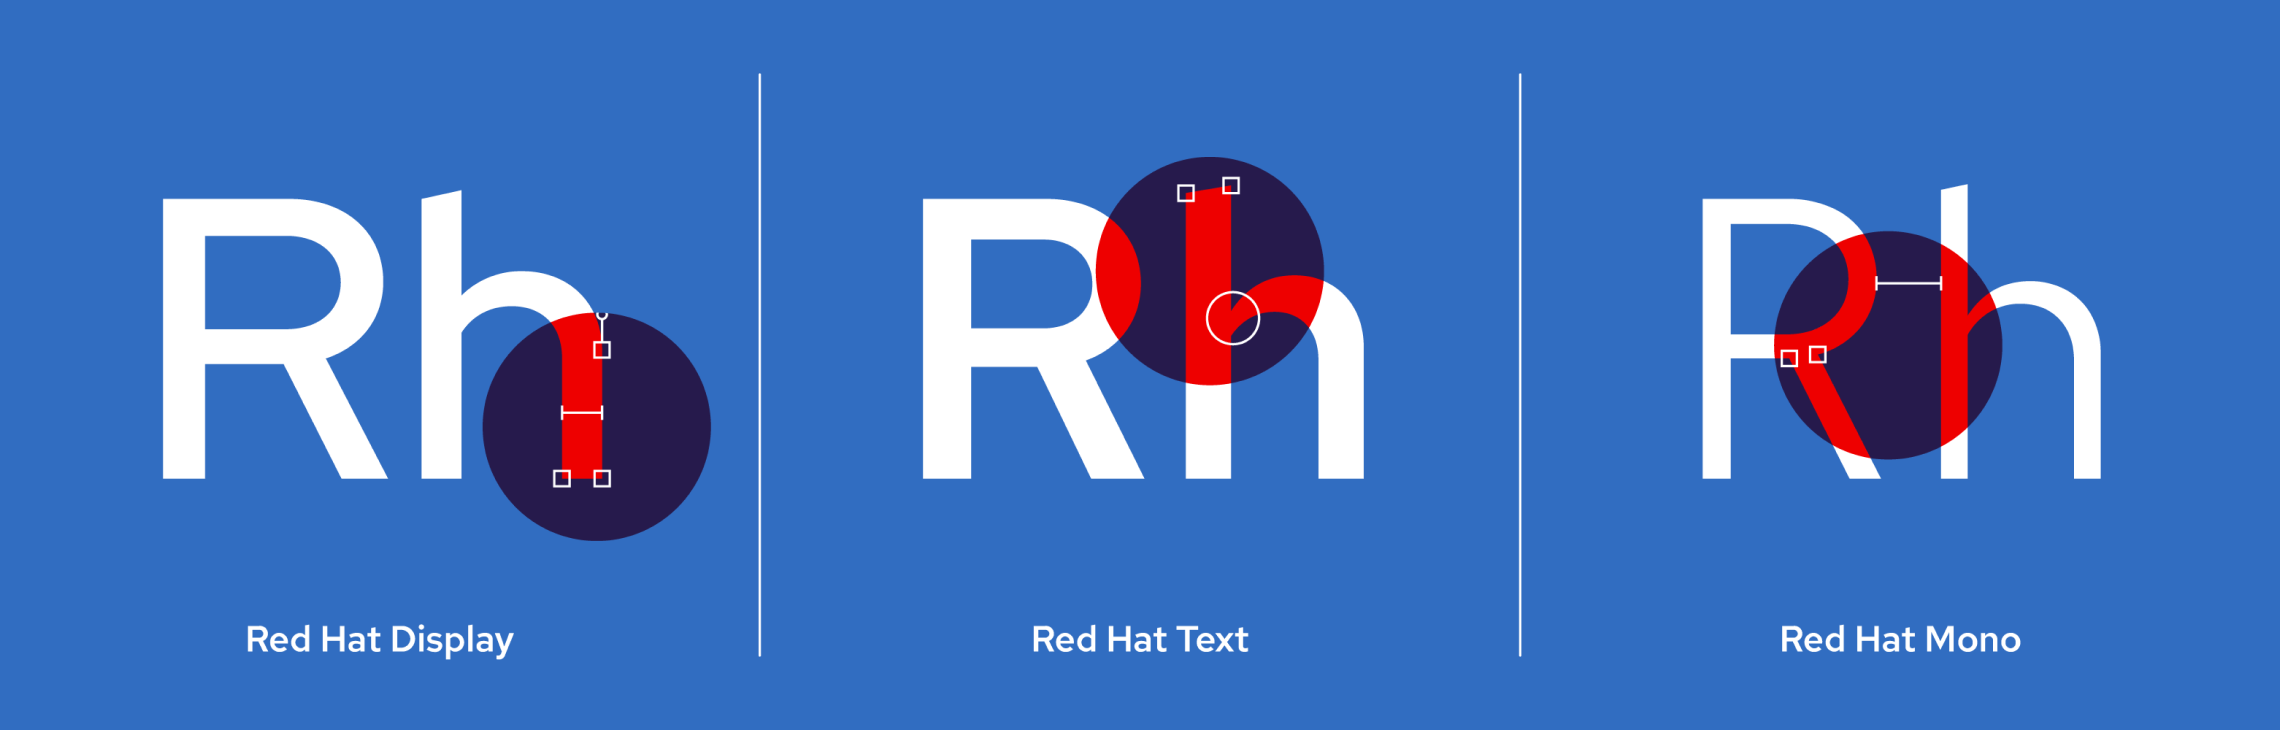  3 examples of the Red Hat font family: Display, Text, and Mono. Each example shows a capital letter R and lowercase letter H with overlays pointing out unique design characteristics.